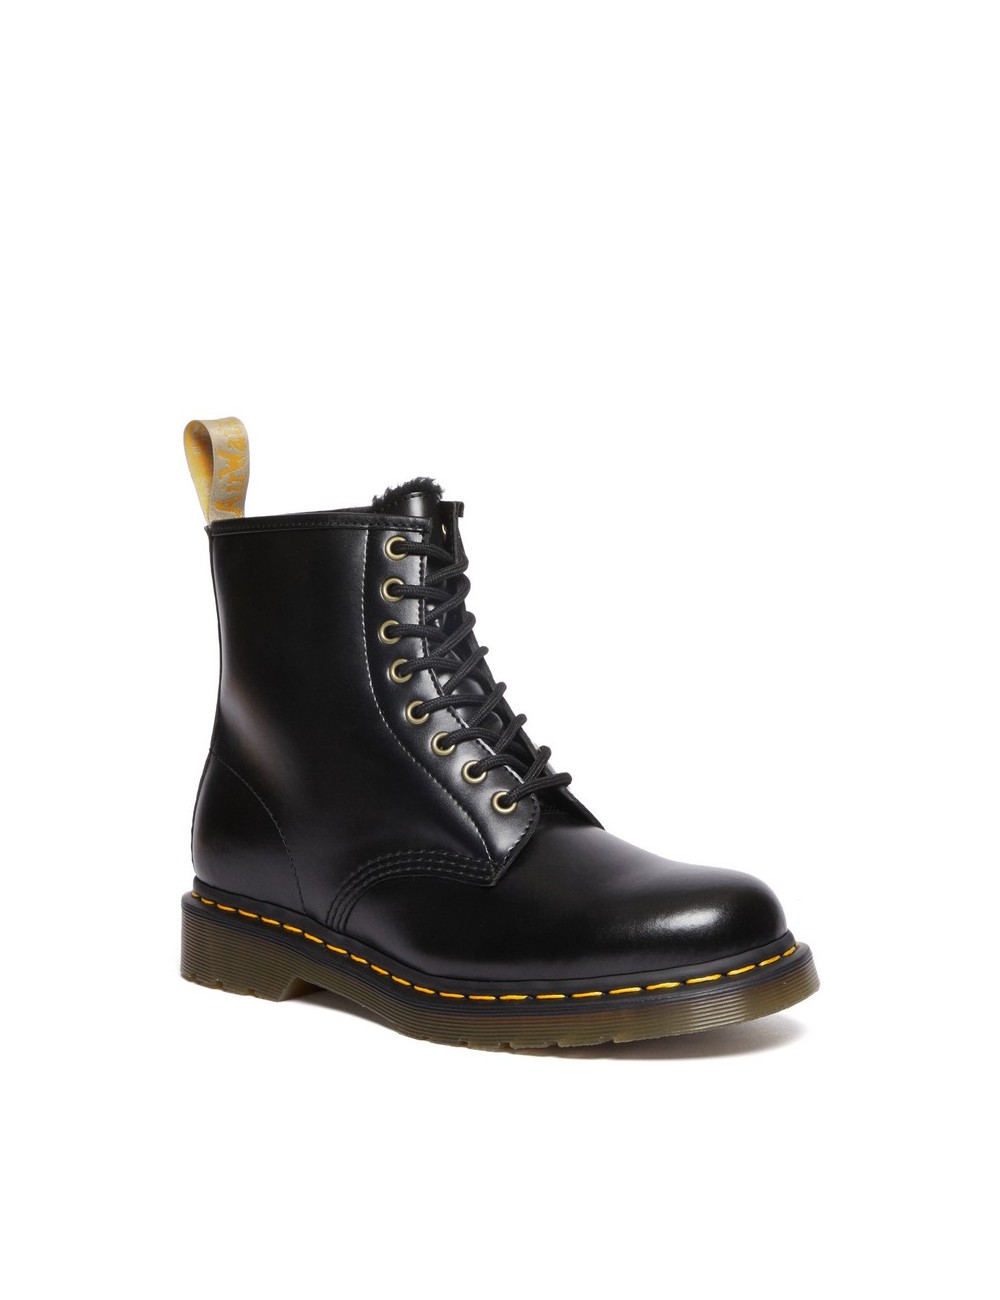 DR MARTENS VEGAN 1460 BORG LINED LACE UP BOOTS